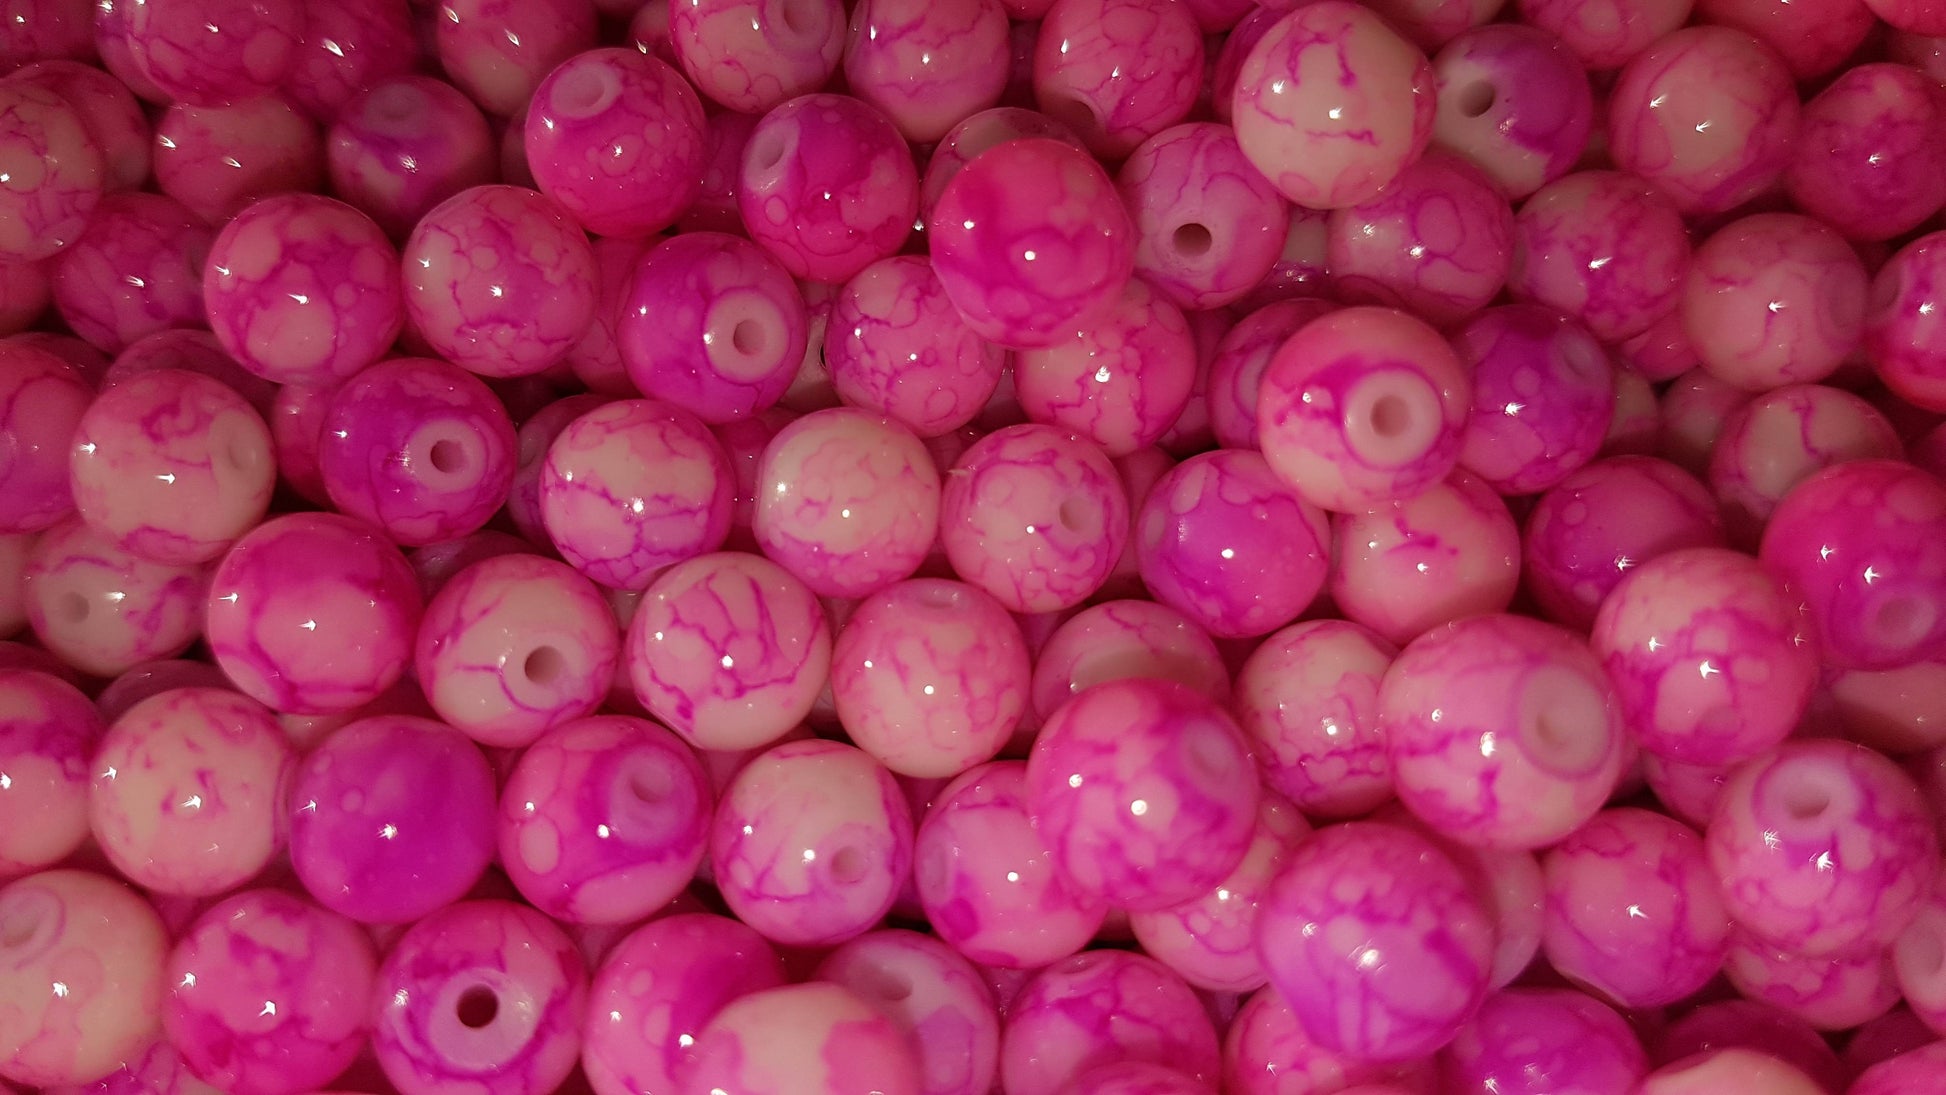 Creek Candy Bead Co. Glass Beads 6mm / Sour Skein Ice